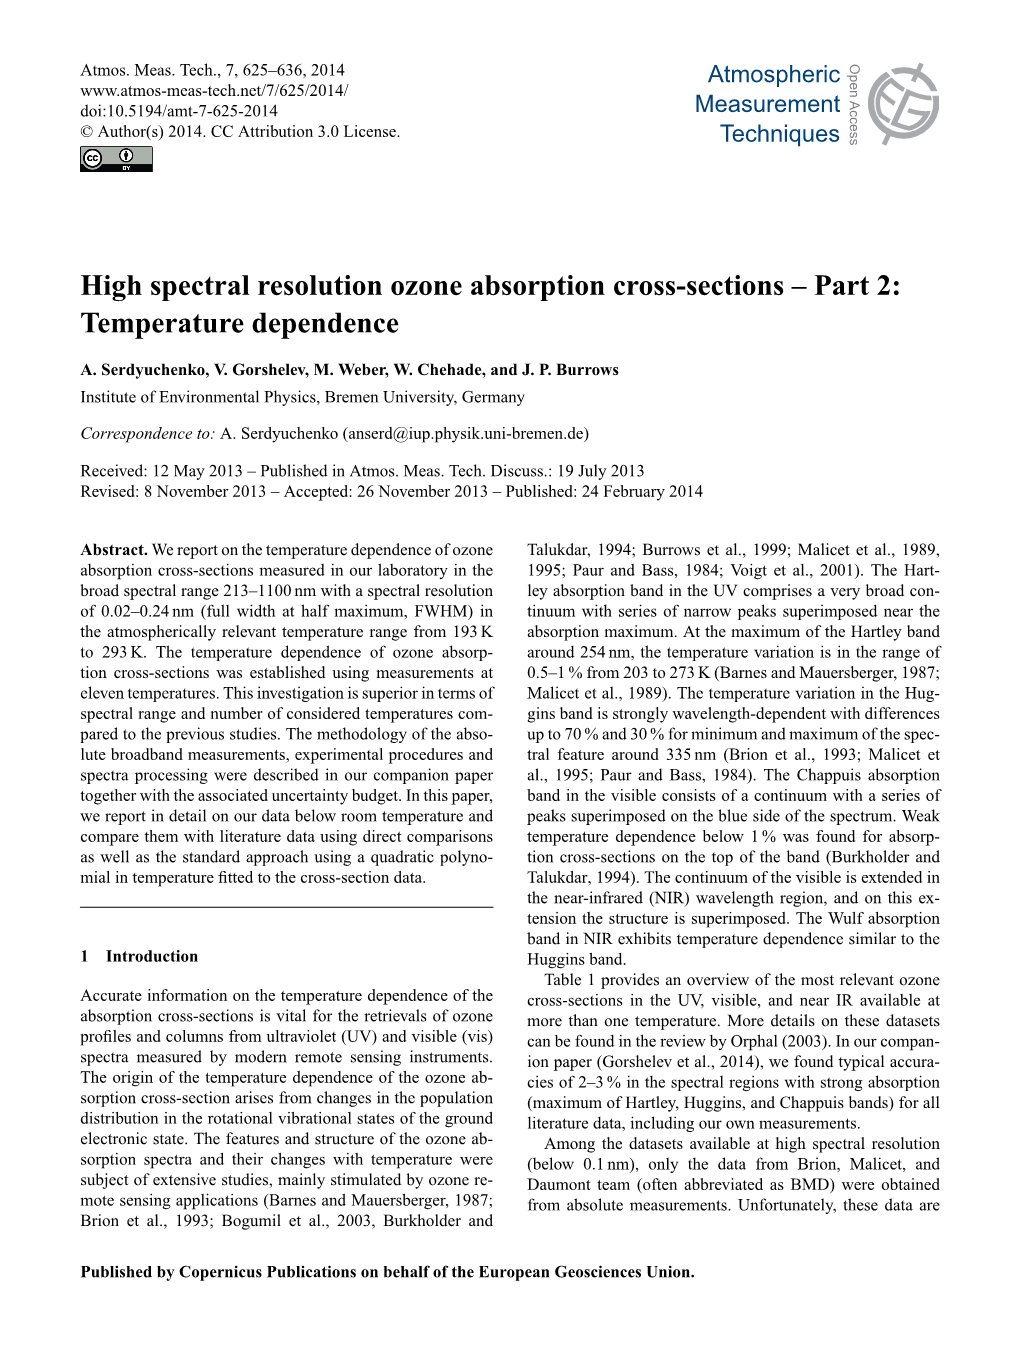 High Spectral Resolution Ozone Absorption Cross-Sections – Part 2: Temperature Dependence